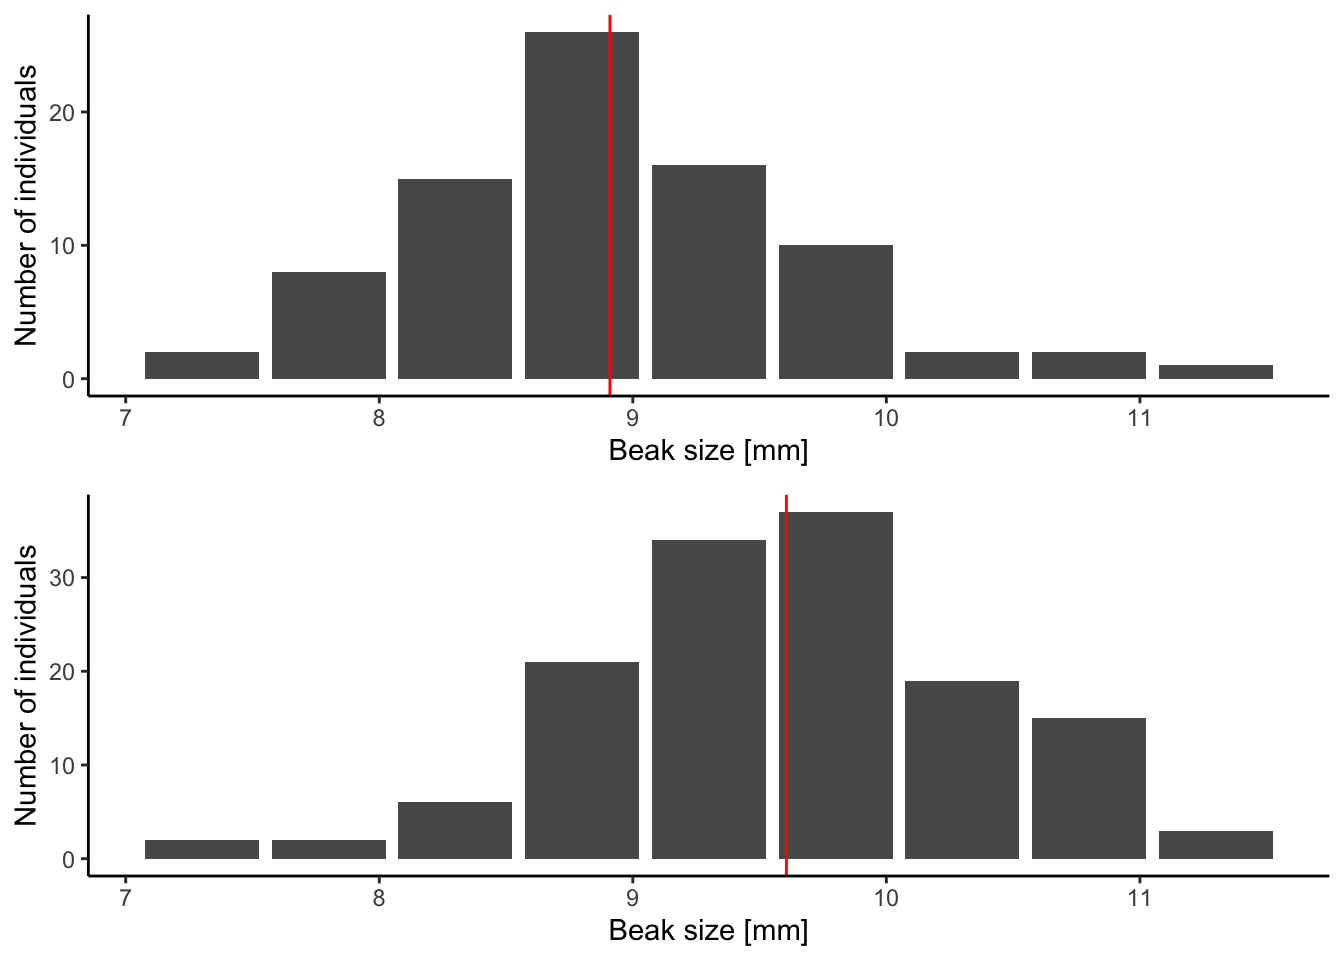 Frequency histograms showing beak size variation in the finch offspring born before the drought (top) and after the drought (bottom). The vertical red lines represent the mean beak size in each set. The beak size of the average offspring born after the selection event was higher than the offspring average prior, indicating that evolution happened. [Data](data/3_offspring_beaks.csv) from Grant and Grant 2003.